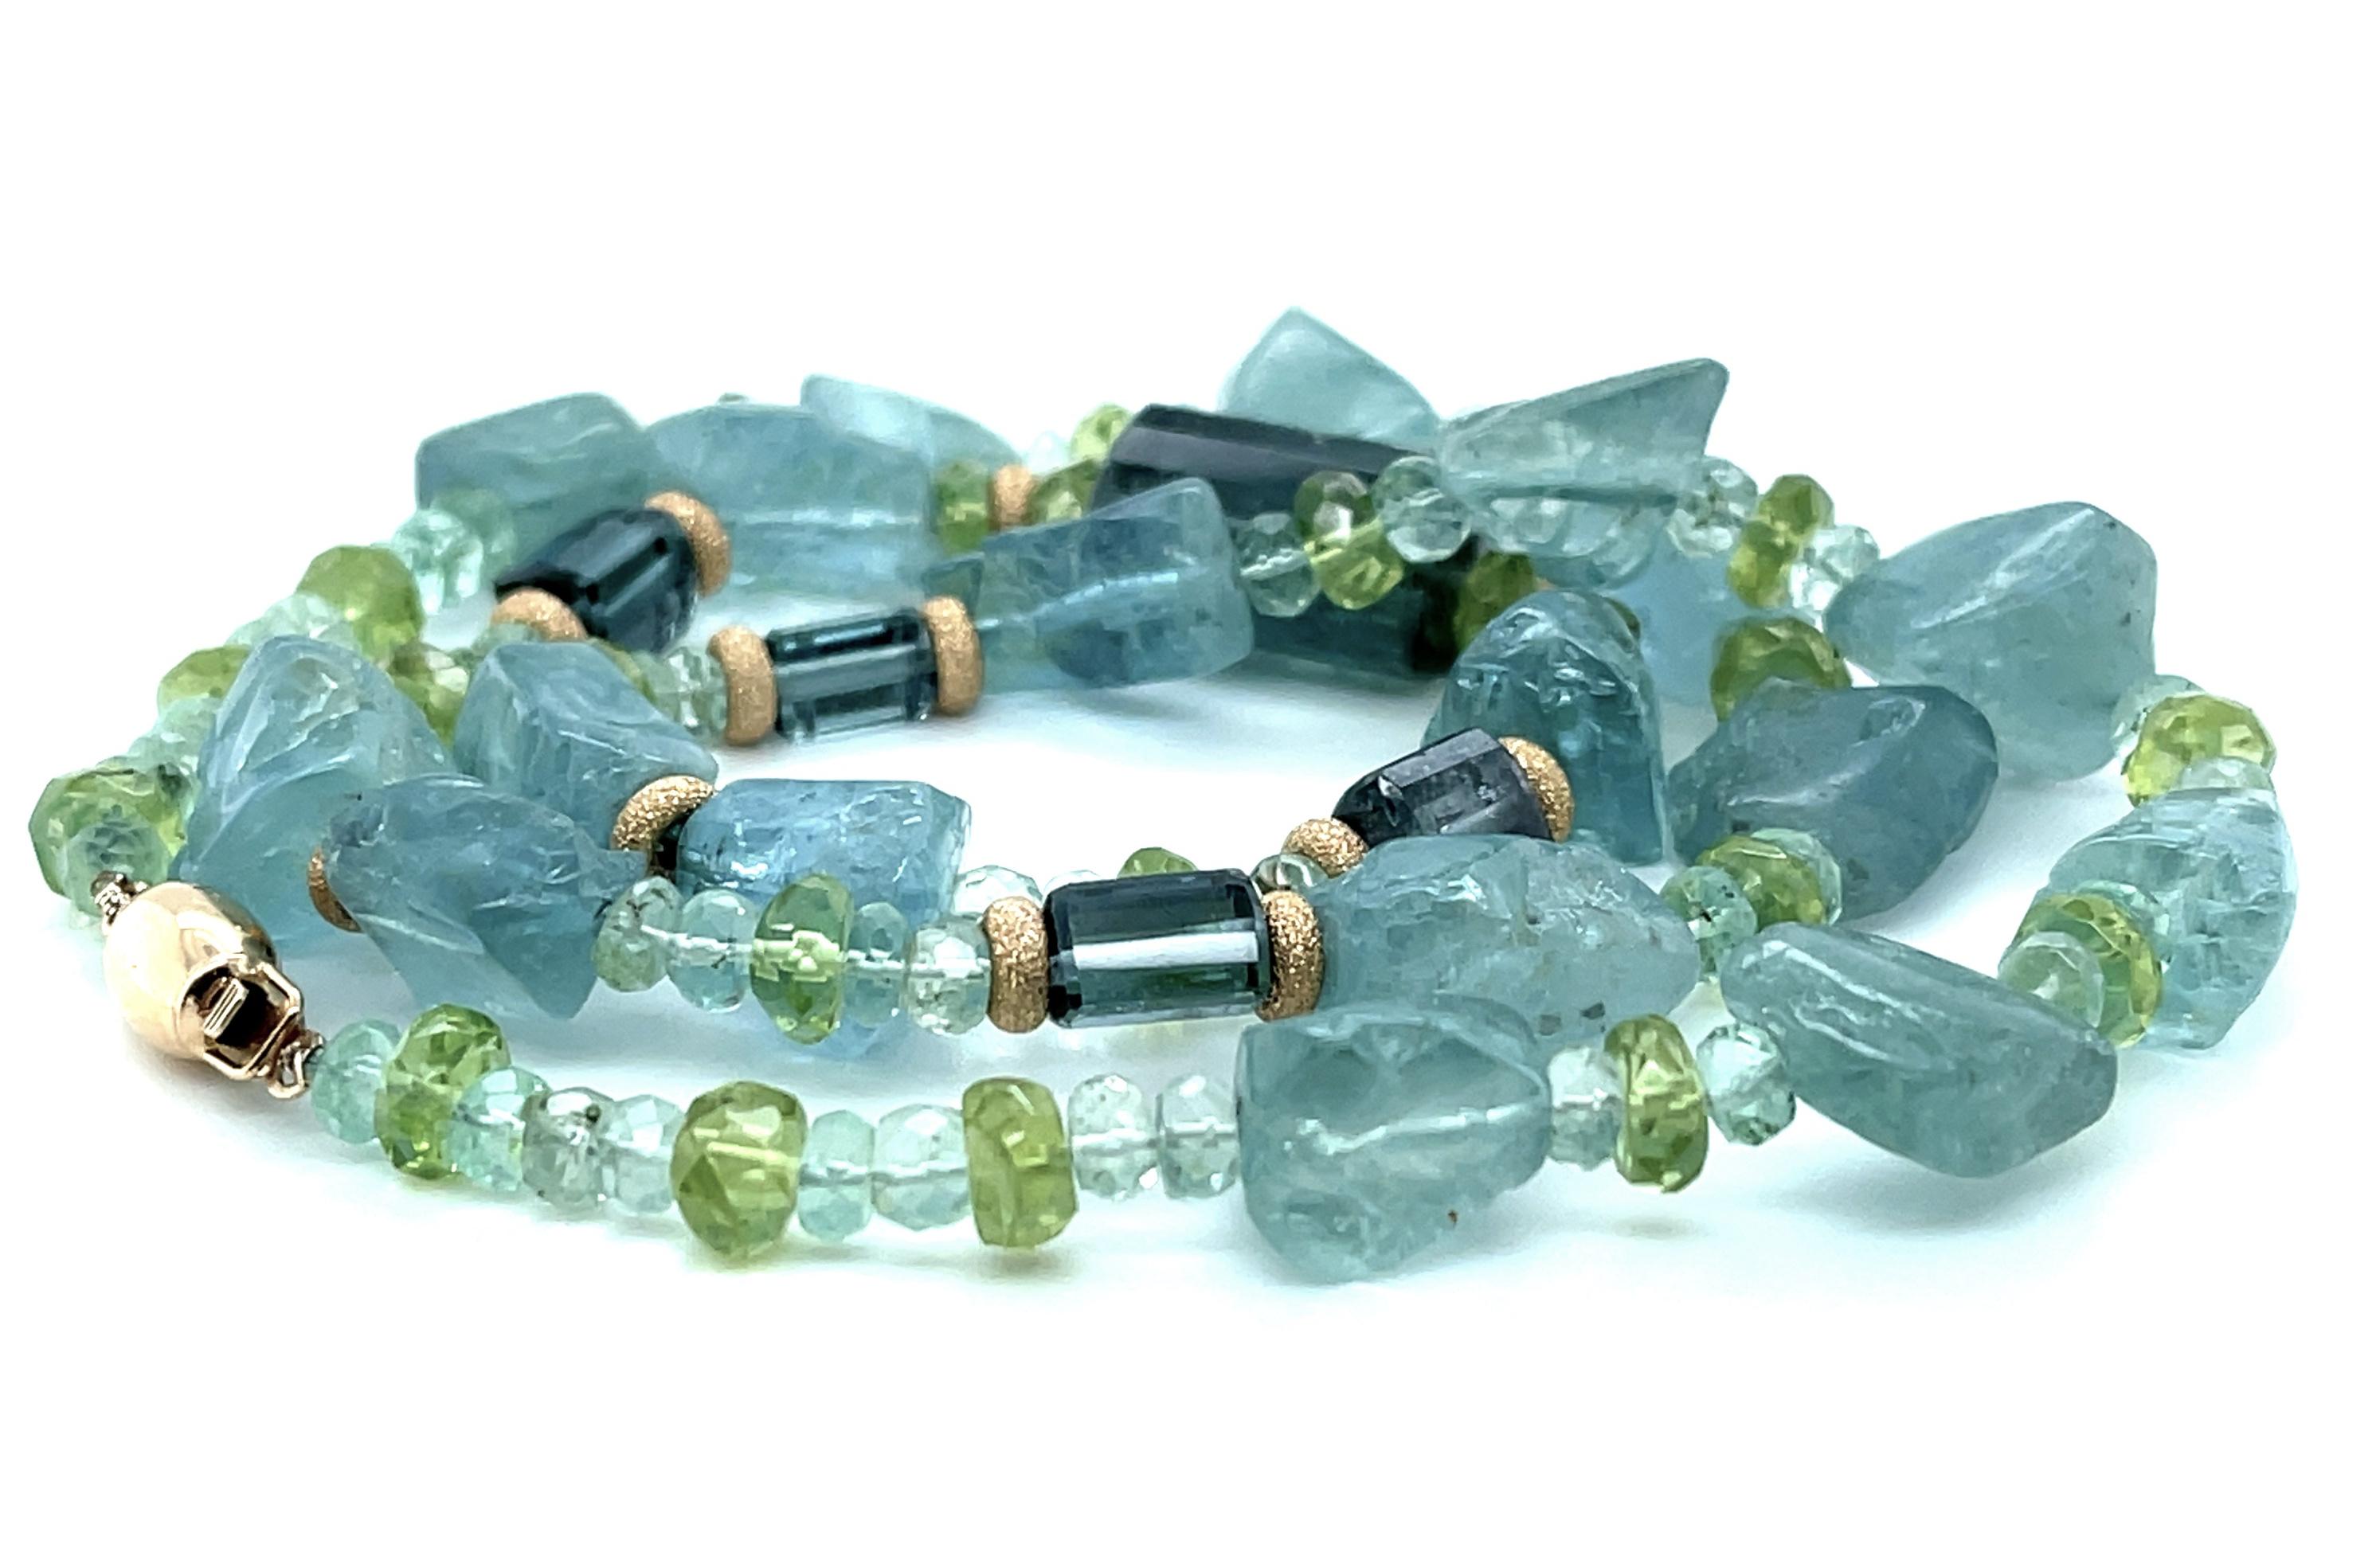 Women's Aquamarine, Indicolite Tourmaline and Peridot Beaded Necklace with Gold Accents